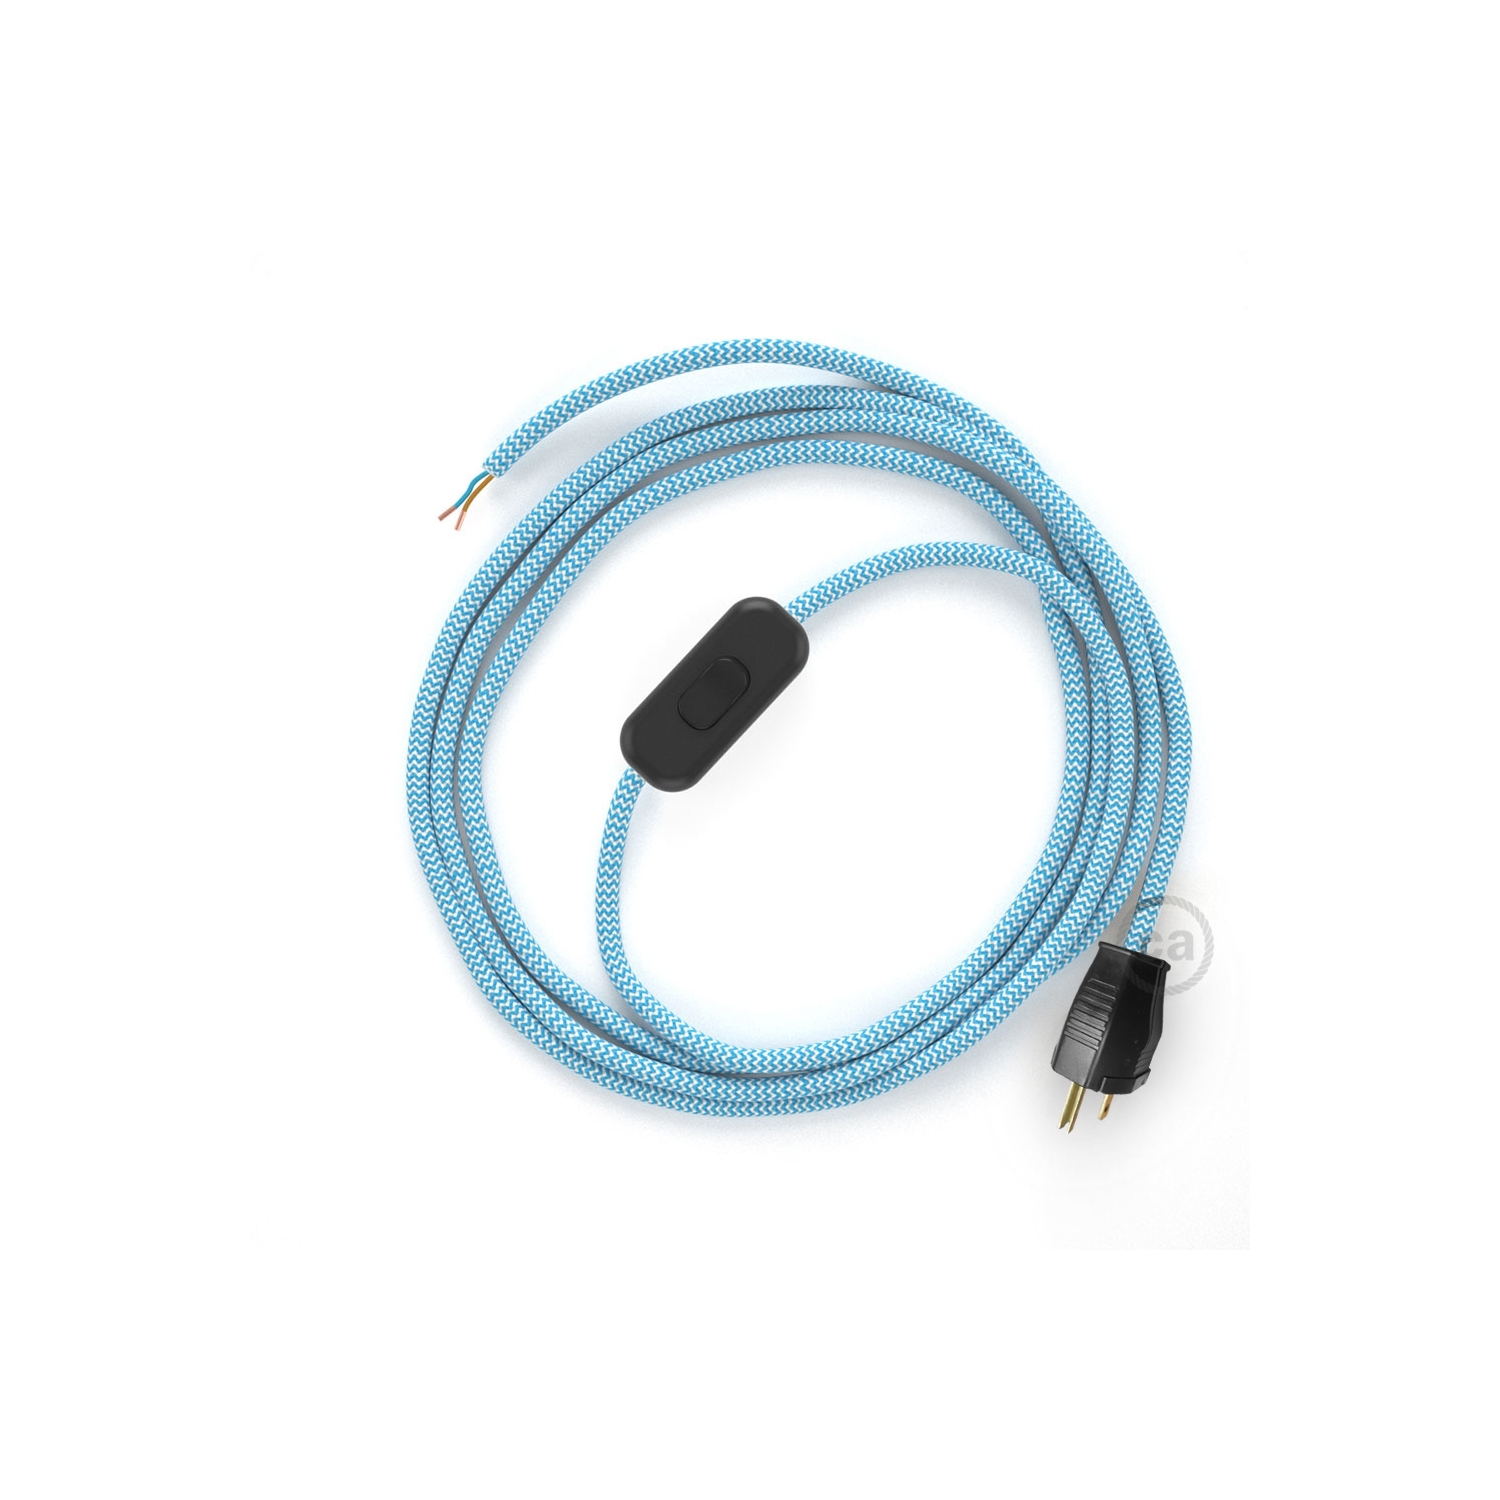 Power Cord with in-line switch, RZ11 Light Blue & White Chevron - Choose color of switch/plug